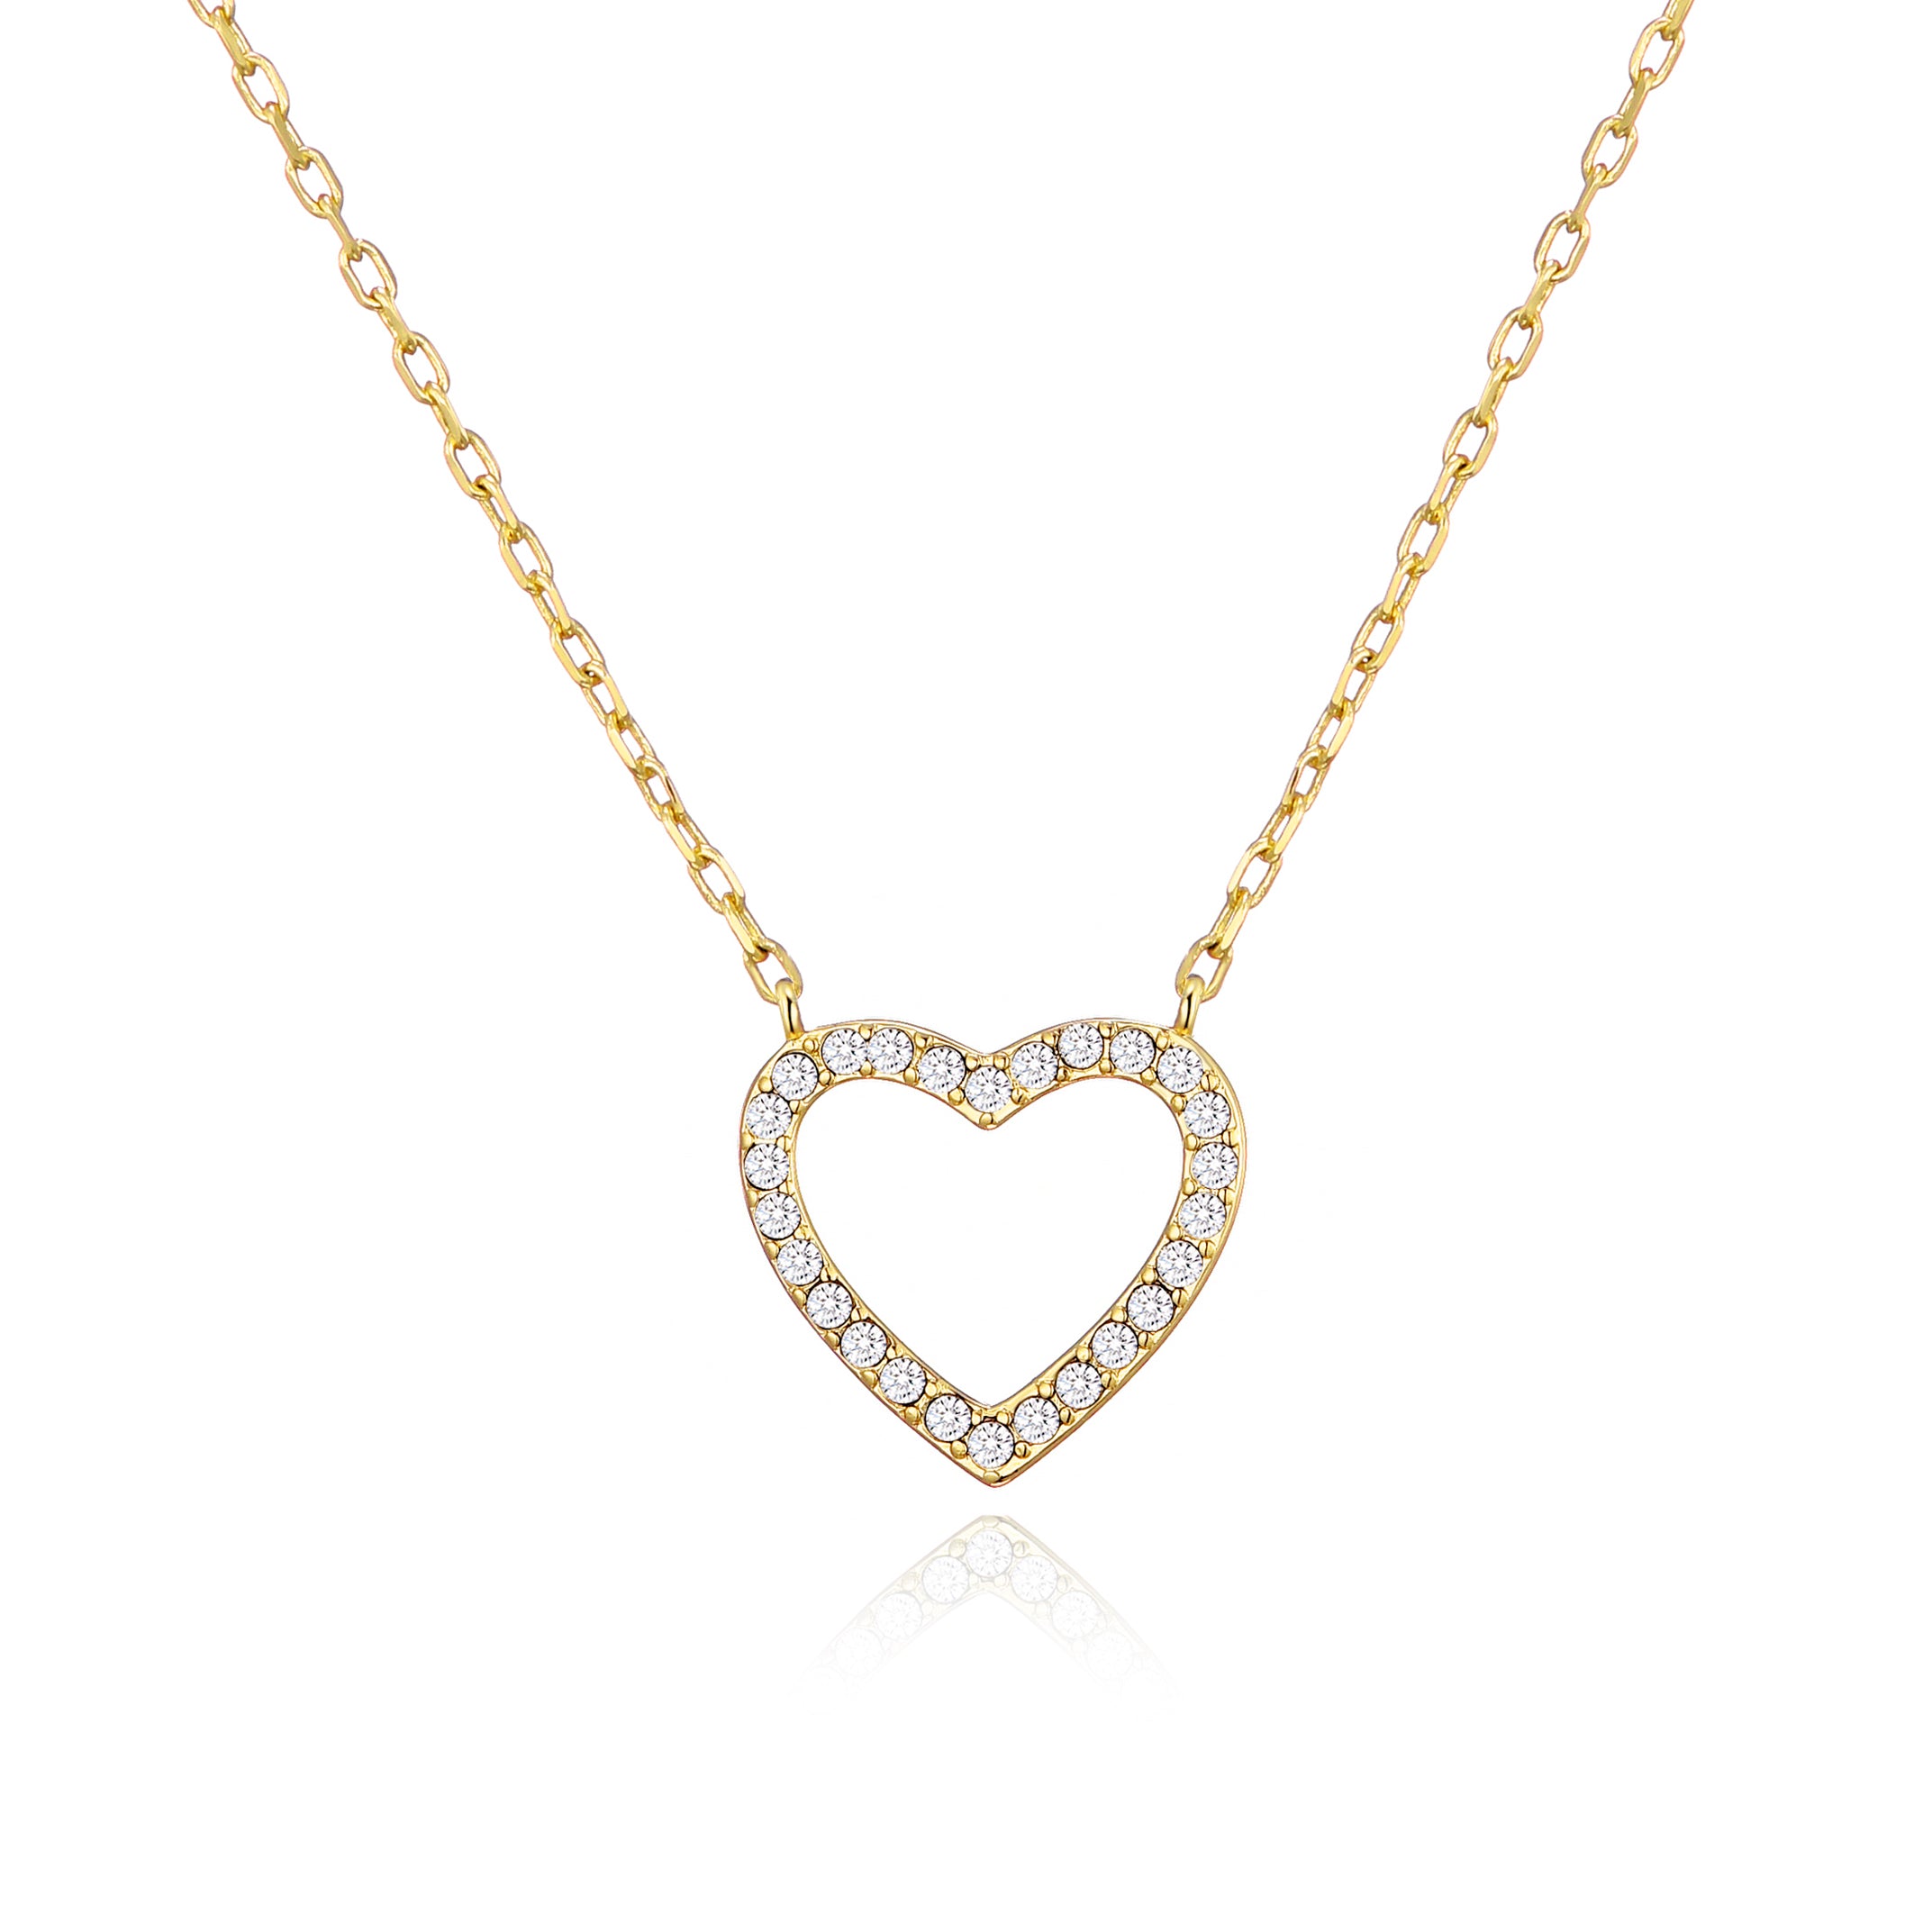 Gold Plated Open Heart Necklace Created with Zircondia® Crystals by Philip Jones Jewellery